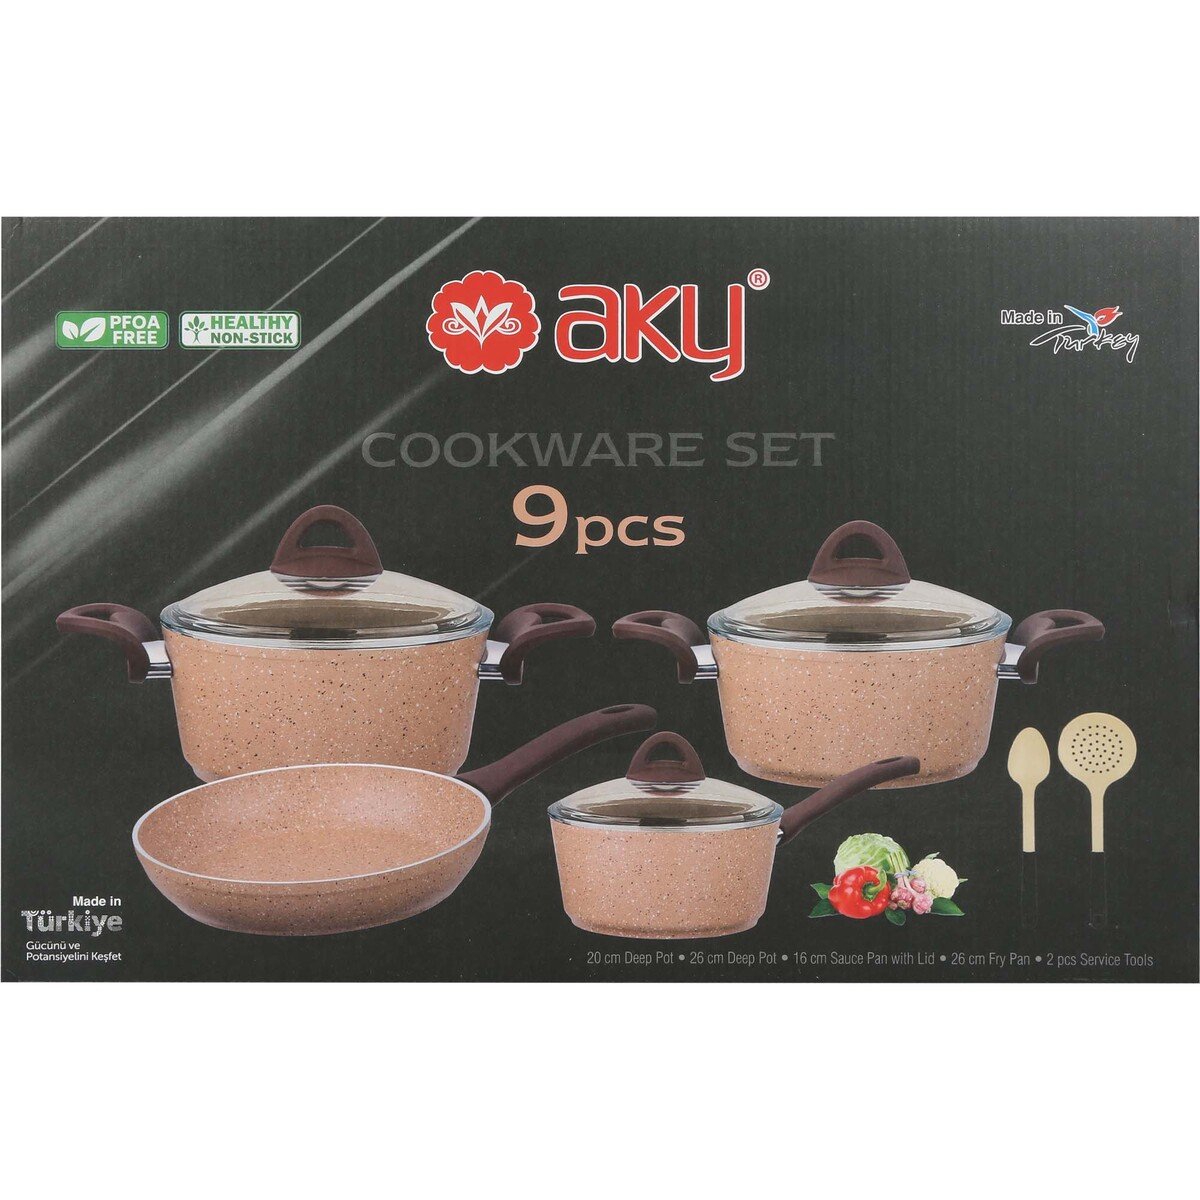 AKY Granit Cookware Set 9pcs YMA900 Assorted Colors